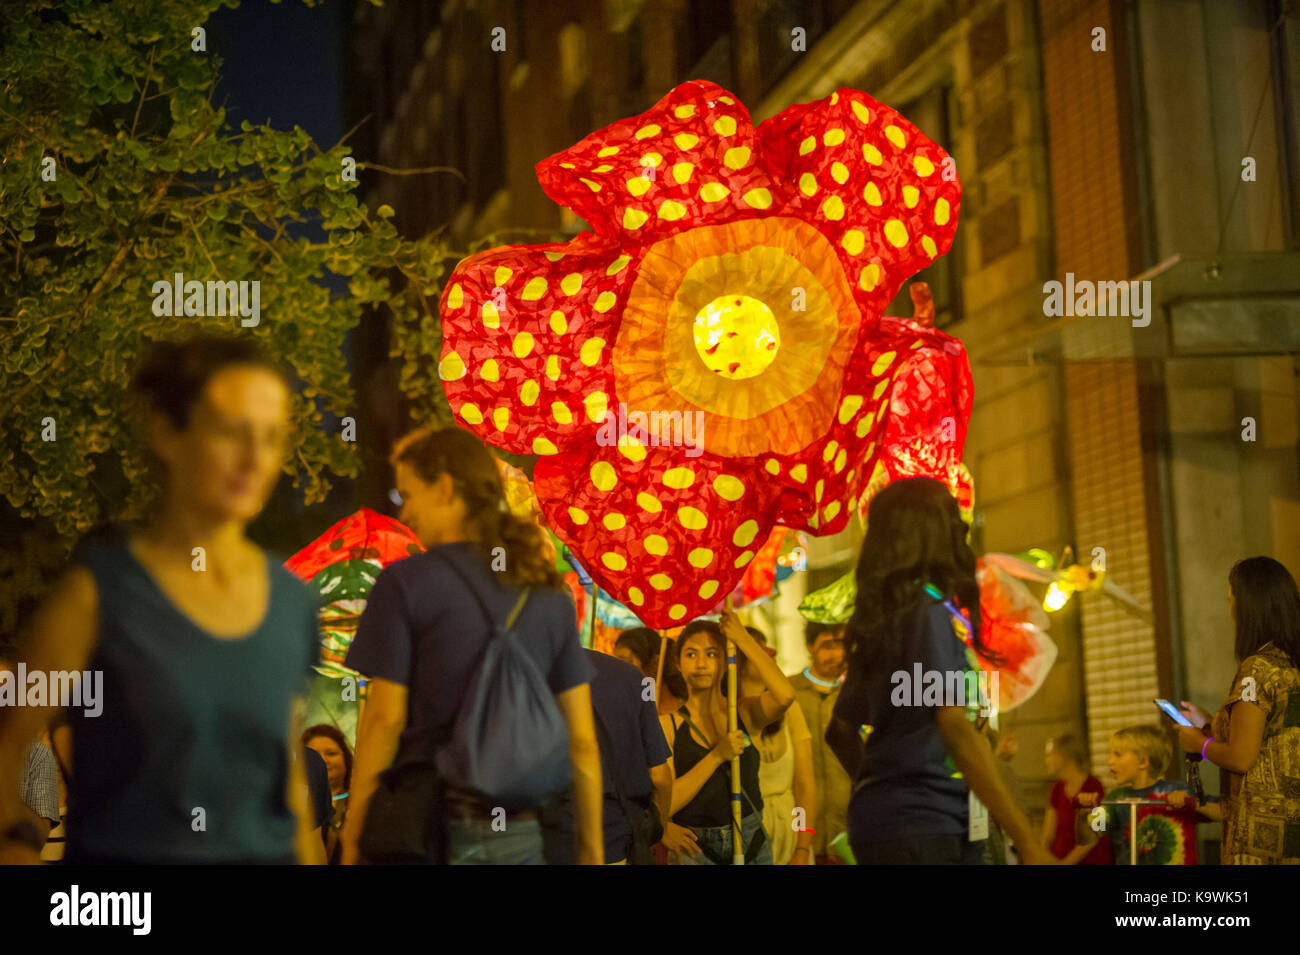 New York, USA. 23rd September, 2017. Local residents joined by Columbia University students and faculty carry lanterns created during the past week in the 6th annual Morningside Lights procession on Saturday, September 23, 2017. Produced by Columbia University Arts Initiative and Miller Theatre, the paper-mâché illuminated lanterns  fulfilled the theme of this years' procession; 'Secret Gardens', commemorating the gardens of the Harlem and Morningside neighborhoods. Credit: Richard Levine/Alamy Live News Stock Photo